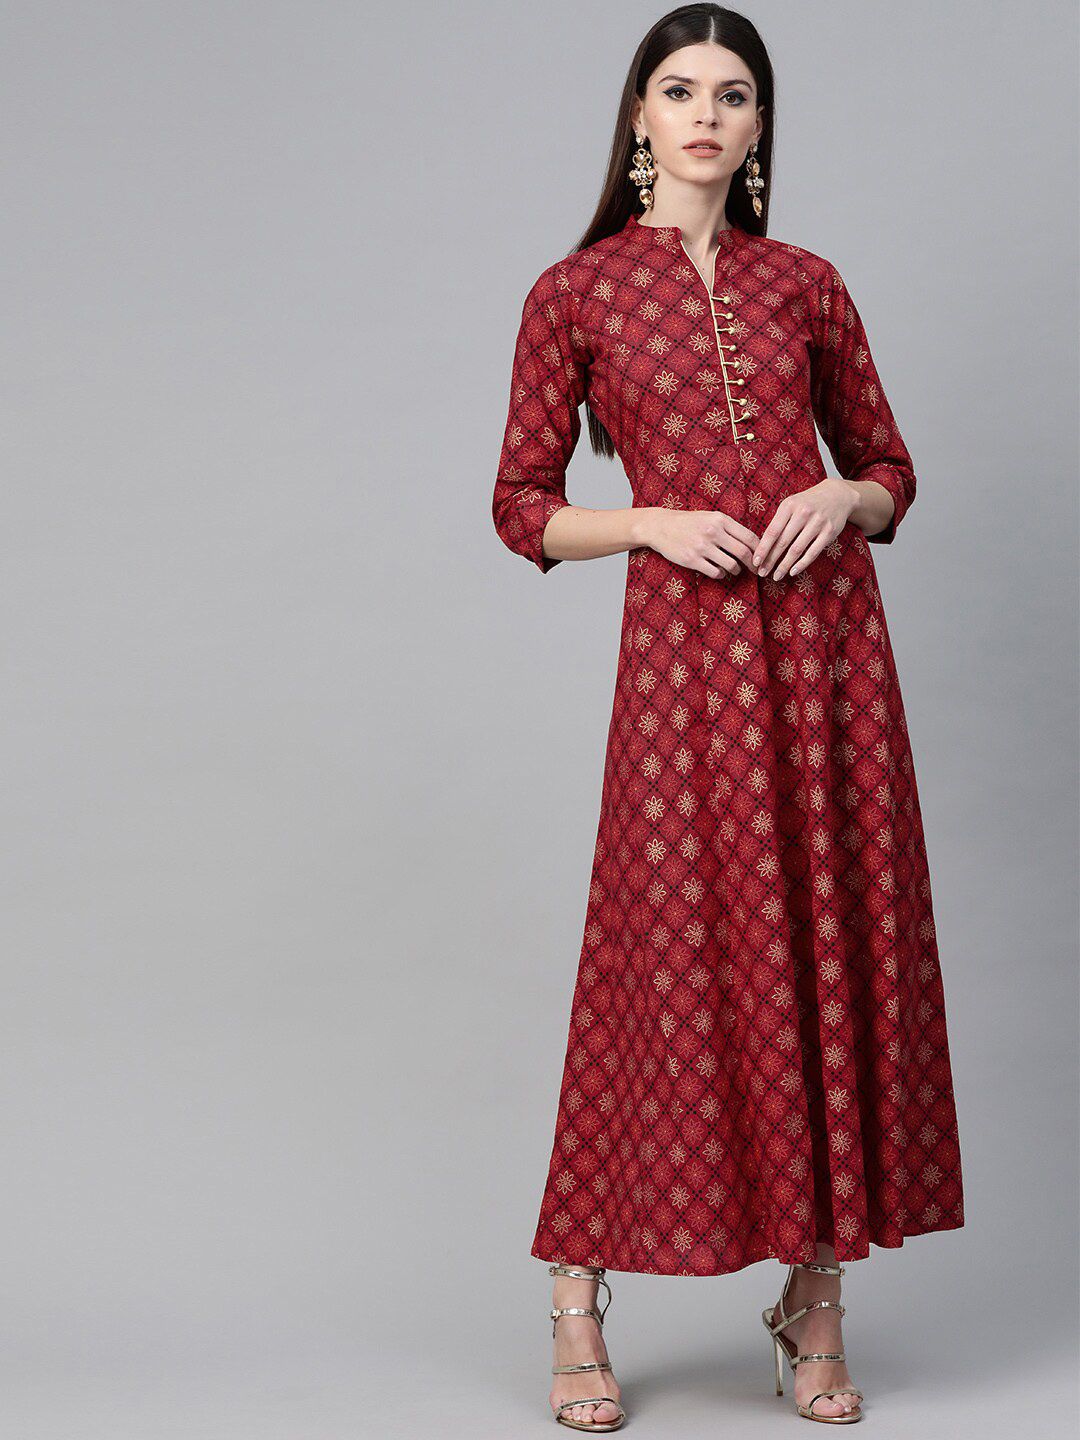 See Designs Maroon Ethnic Motifs Ethnic Maxi Dress Price in India